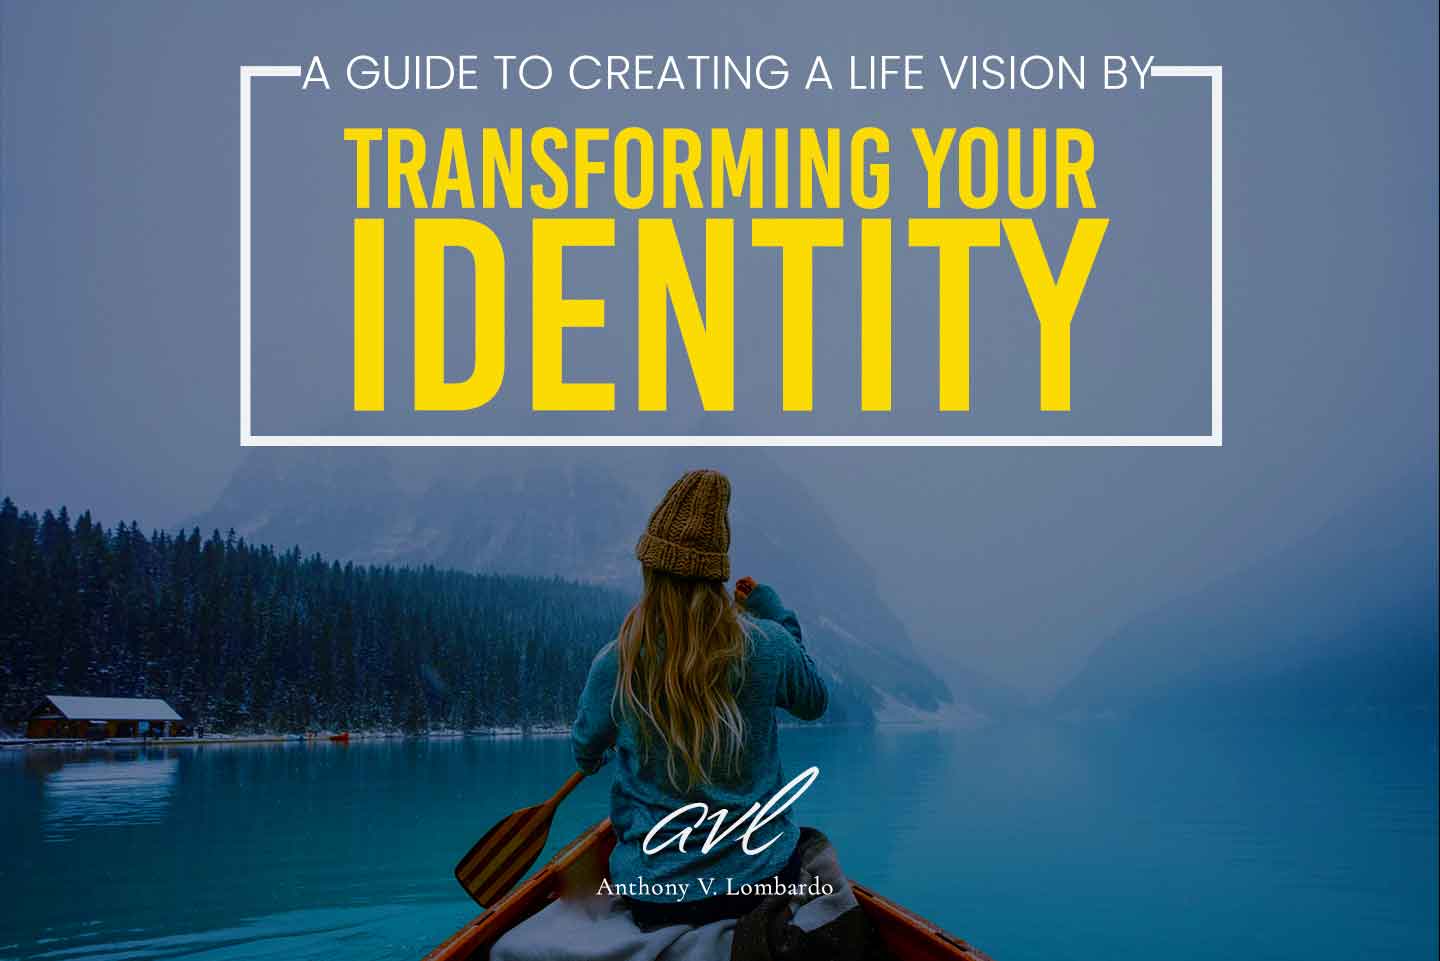 A guide to creating a life vision by transforming your identity